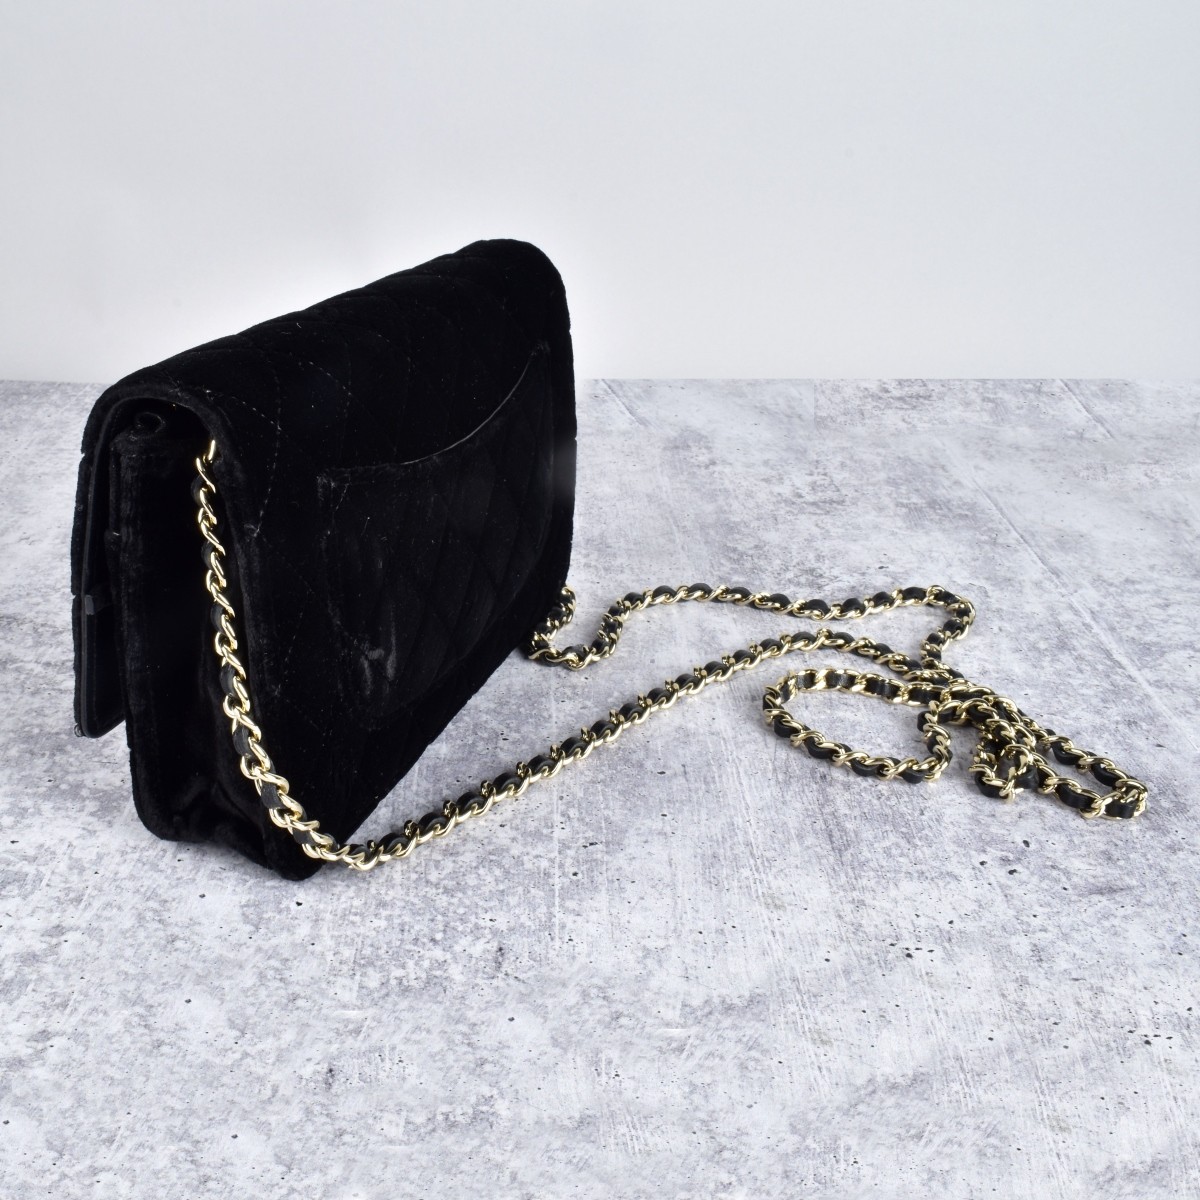 Chanel Black Quilted Suede Crossbody Bag